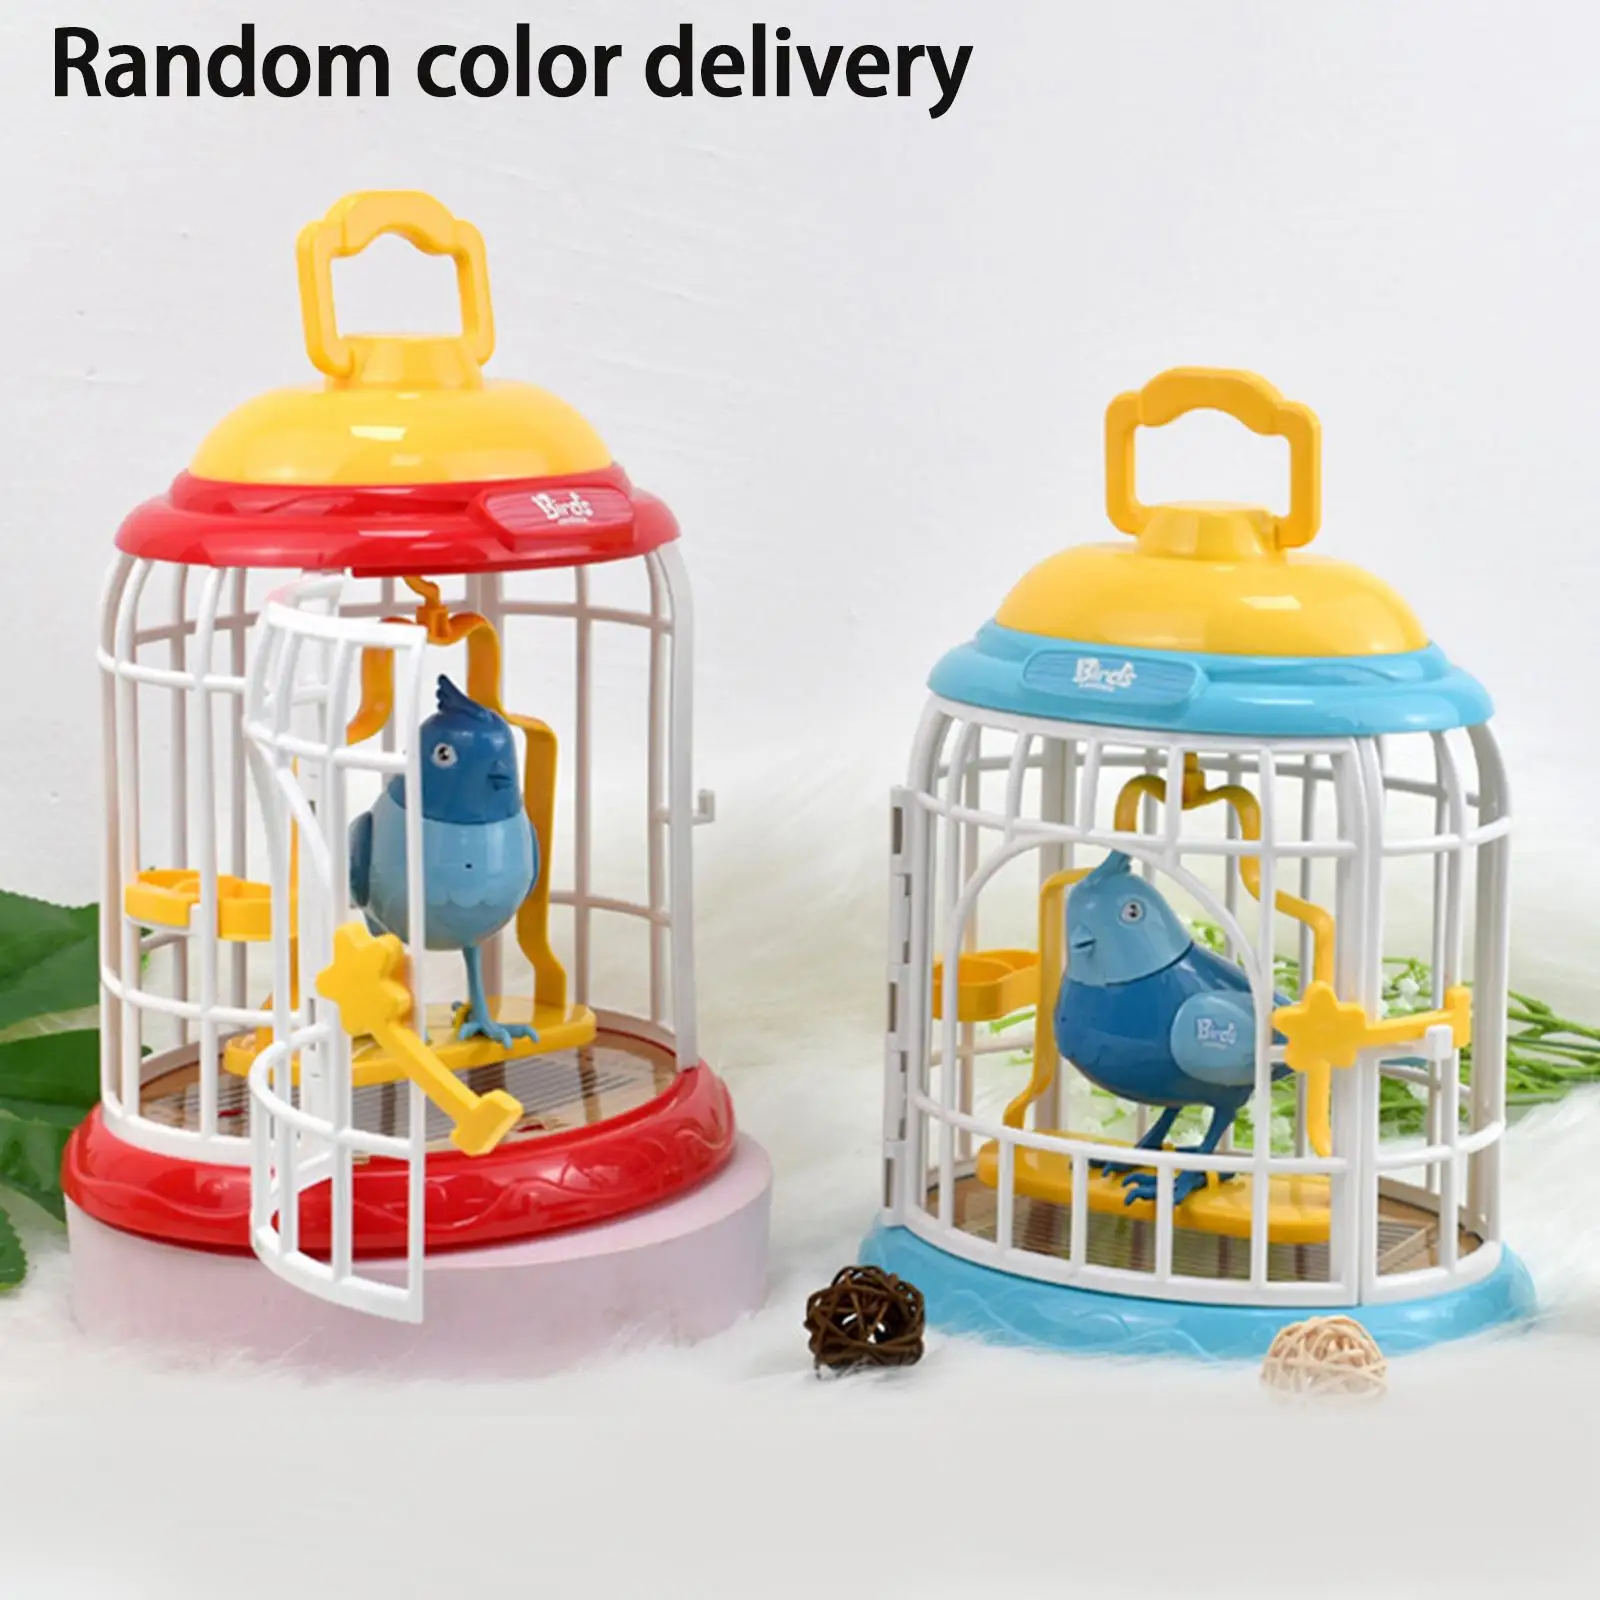  Singing Chirping Bird  Educational Toy Sparrow  Voice Control Bird Toy  Oanament Preschool Toddler Kids Child